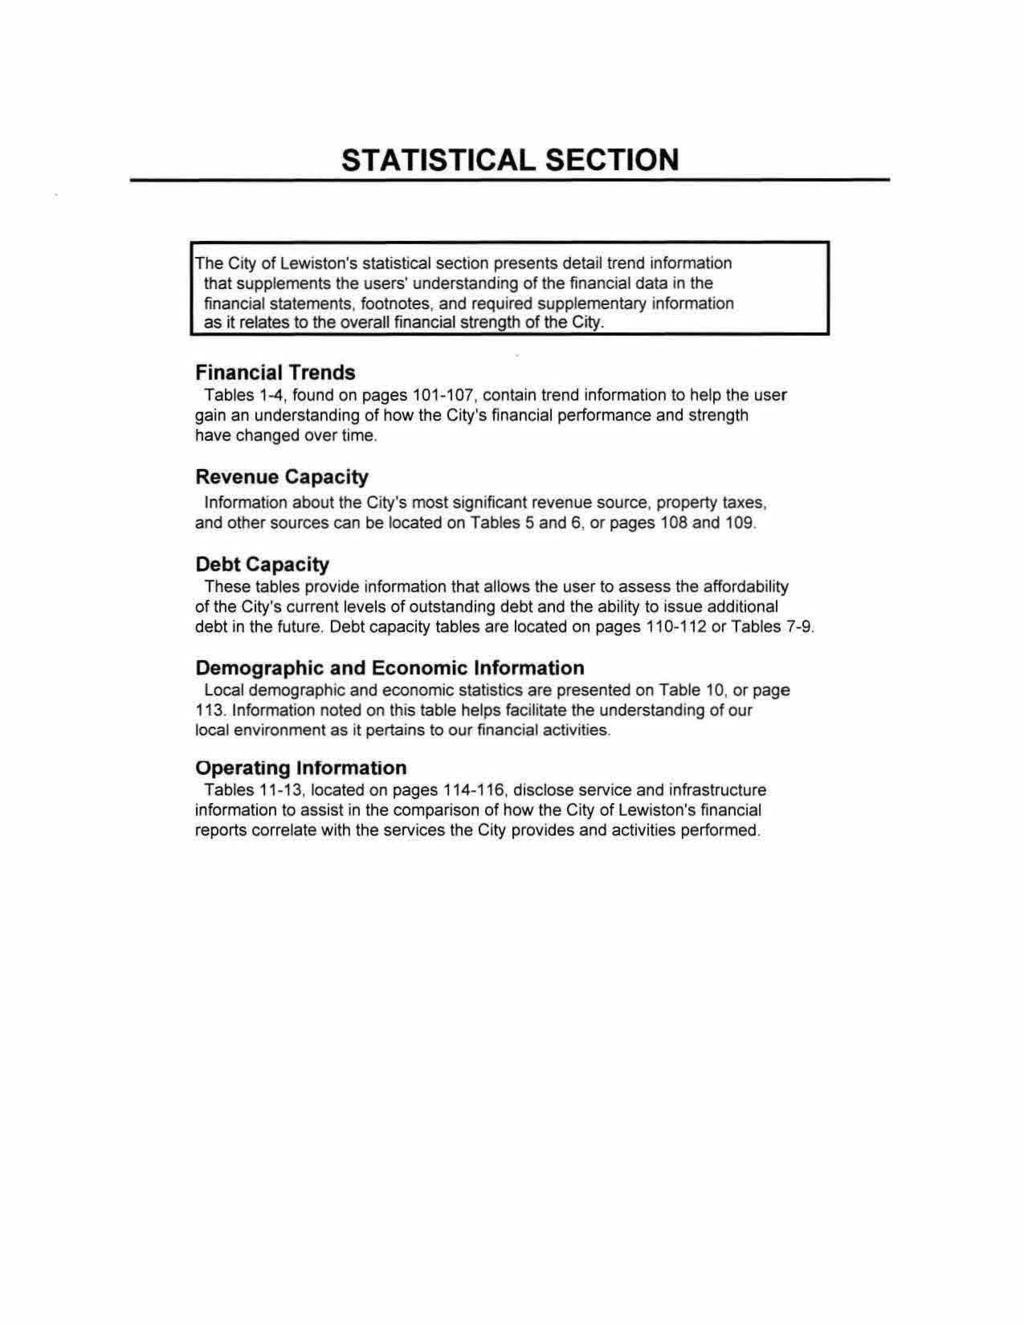 STATISTICAL SECTION The City of Lewiston's statistical section presents detail trend information that supplements the users' understanding of the financial data in the financial statements.